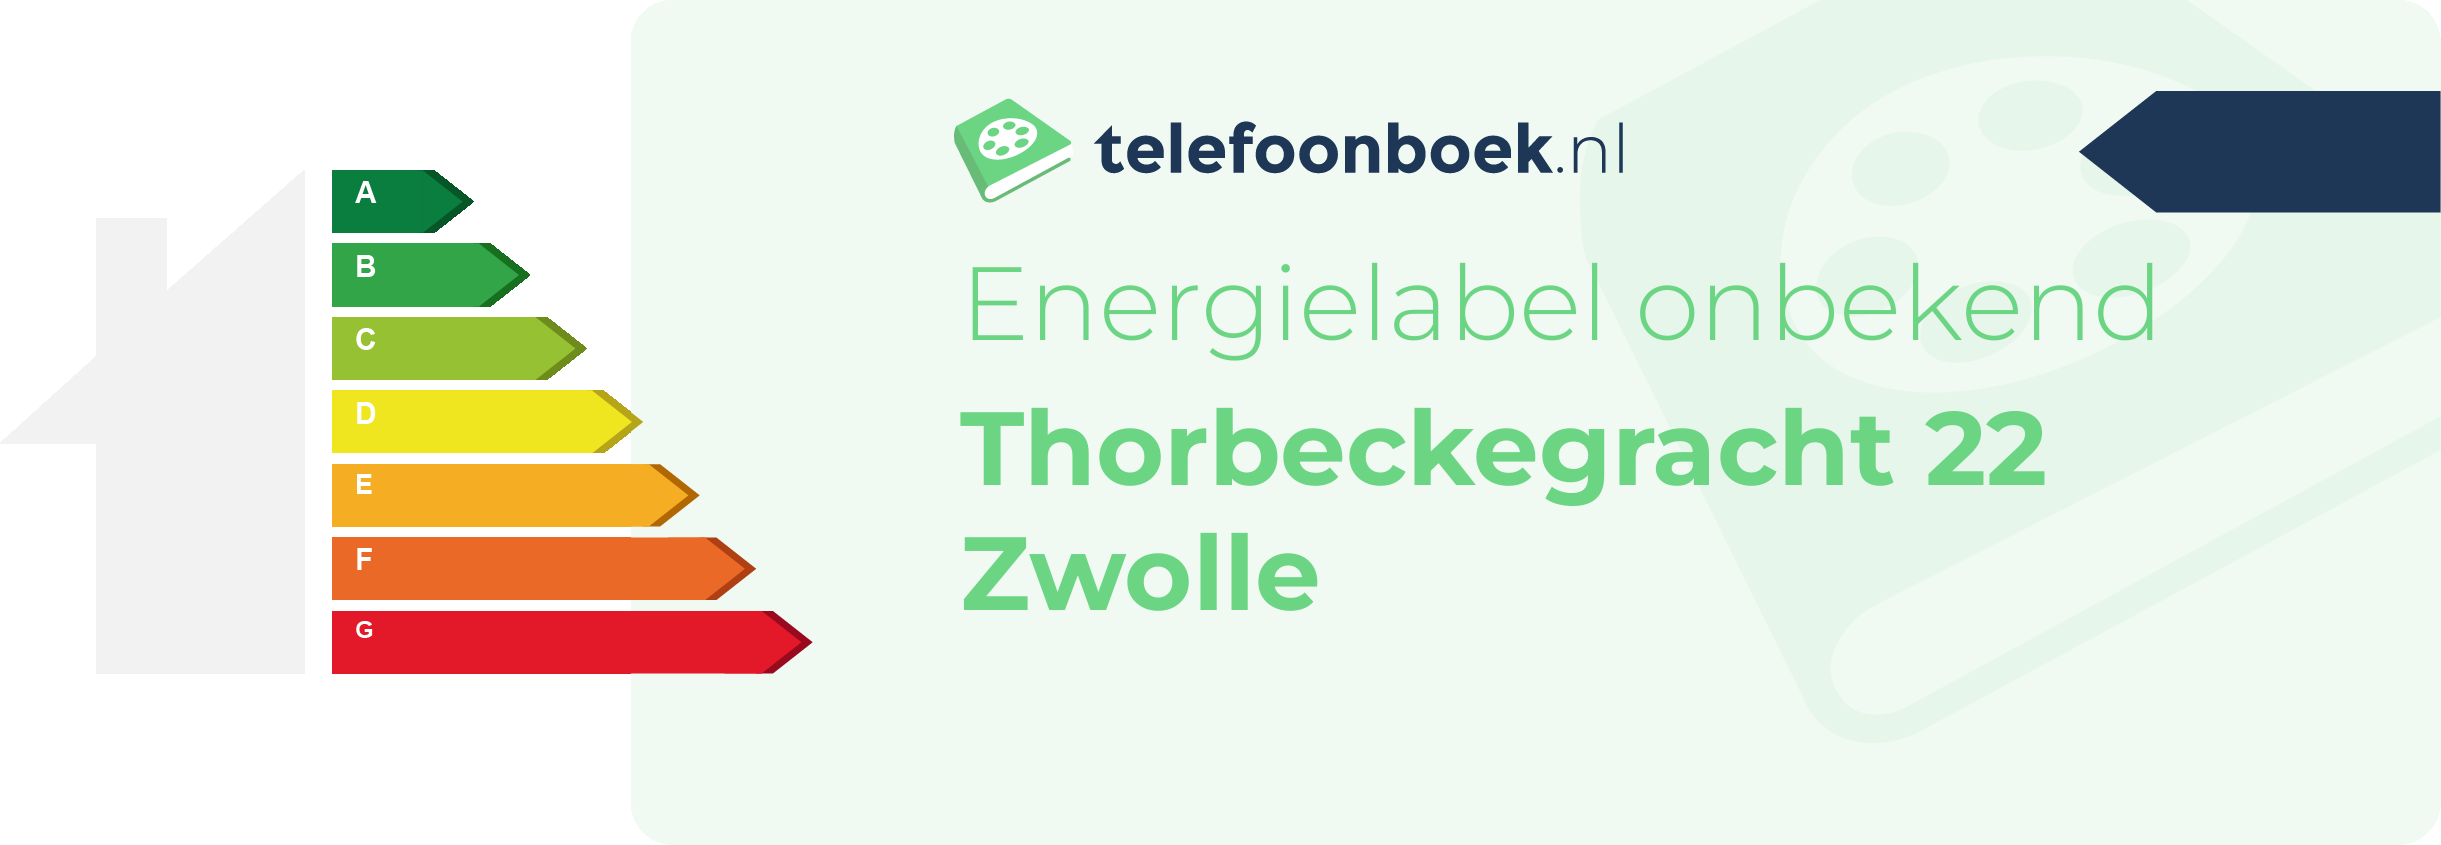 Energielabel Thorbeckegracht 22 Zwolle